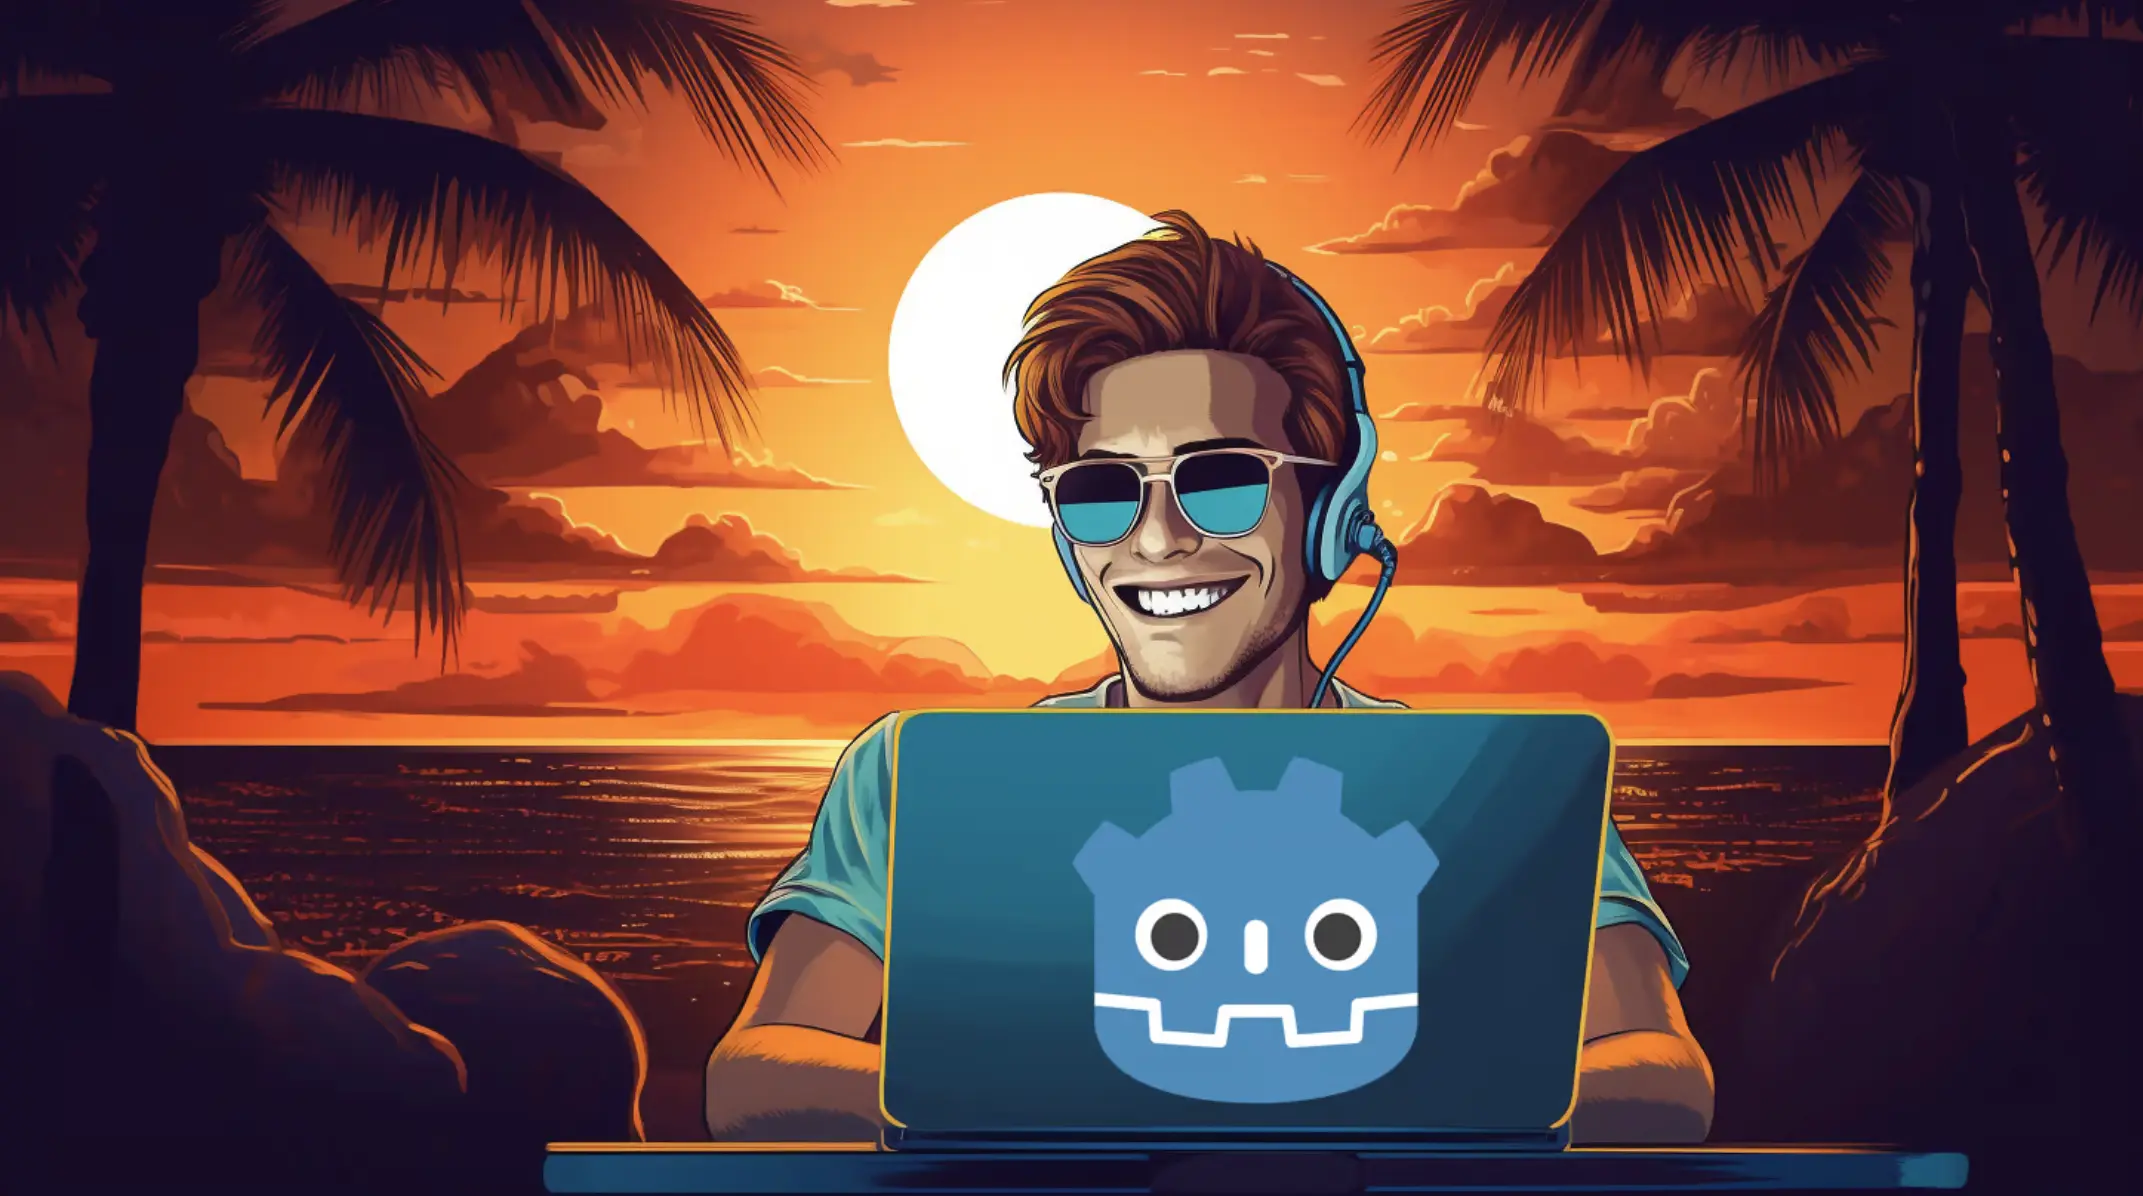 Learn Game Development with Godot